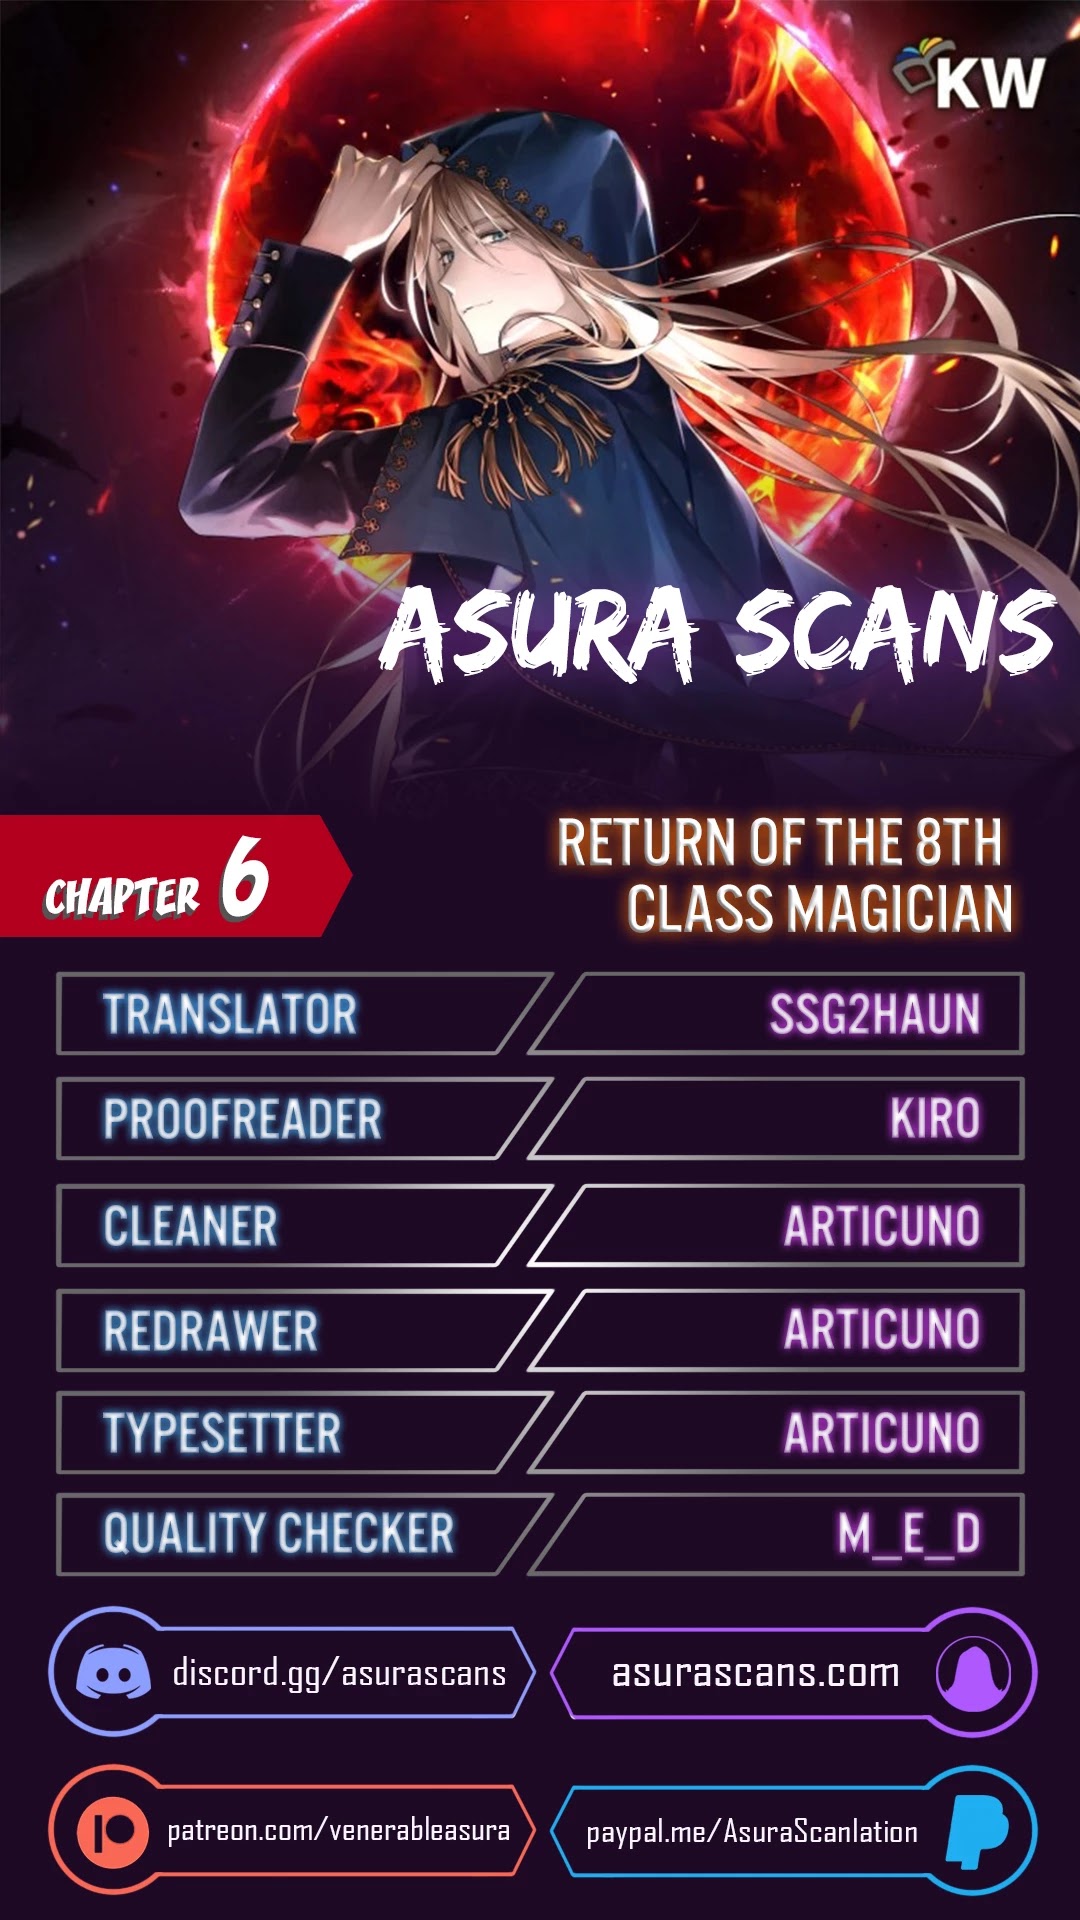 Return of the 8th class Magician chapter 6